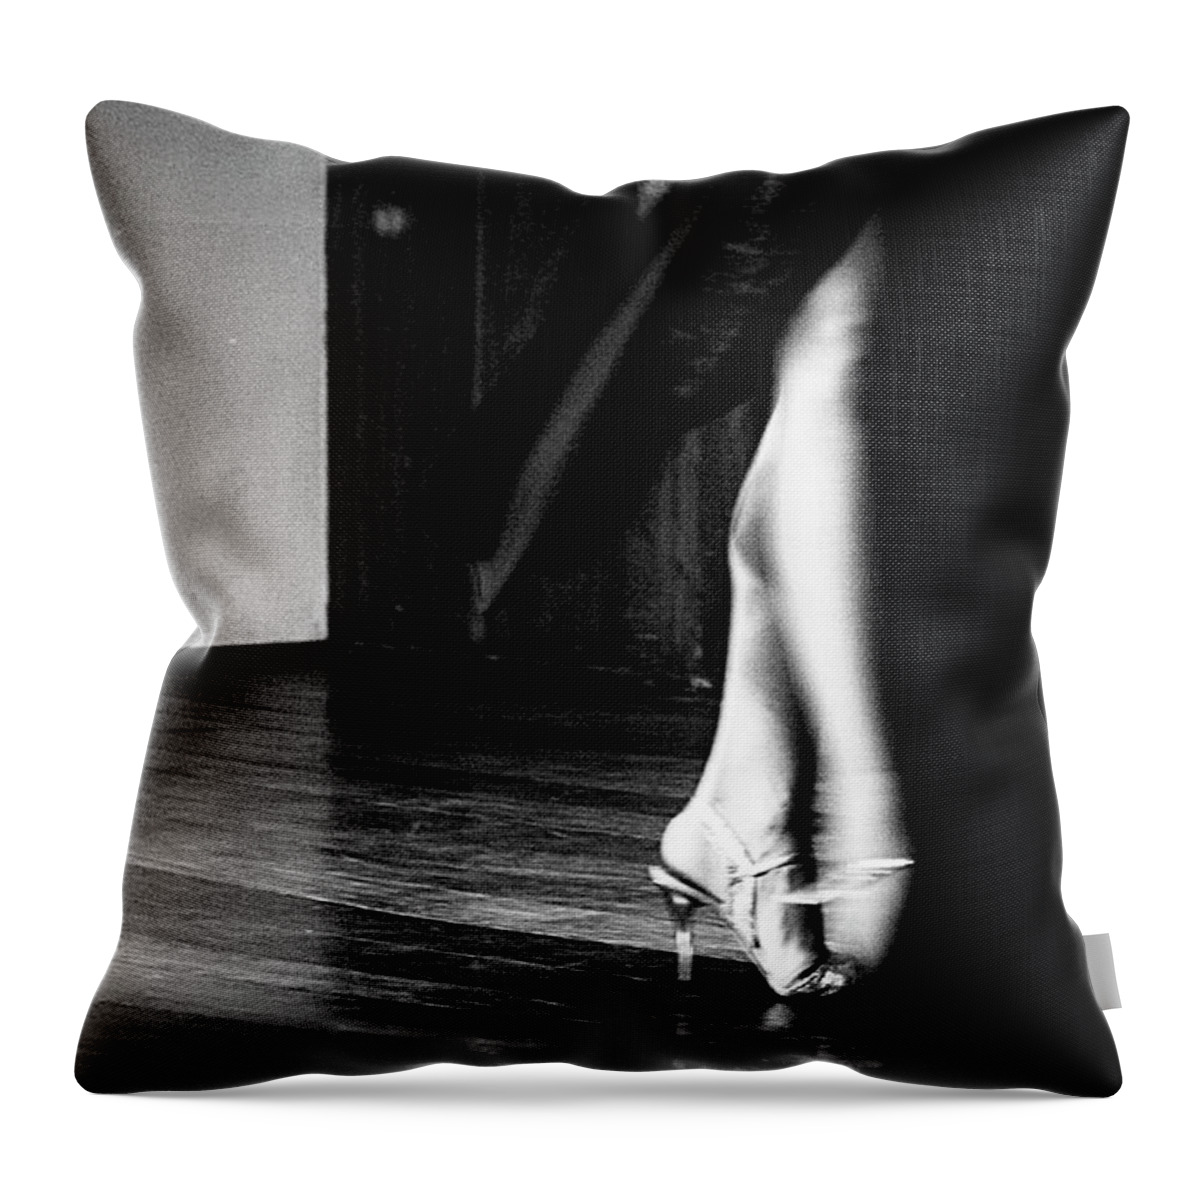 Heterosexual Couple Throw Pillow featuring the photograph Low Section Of Couple Dancing by Luiz Ab